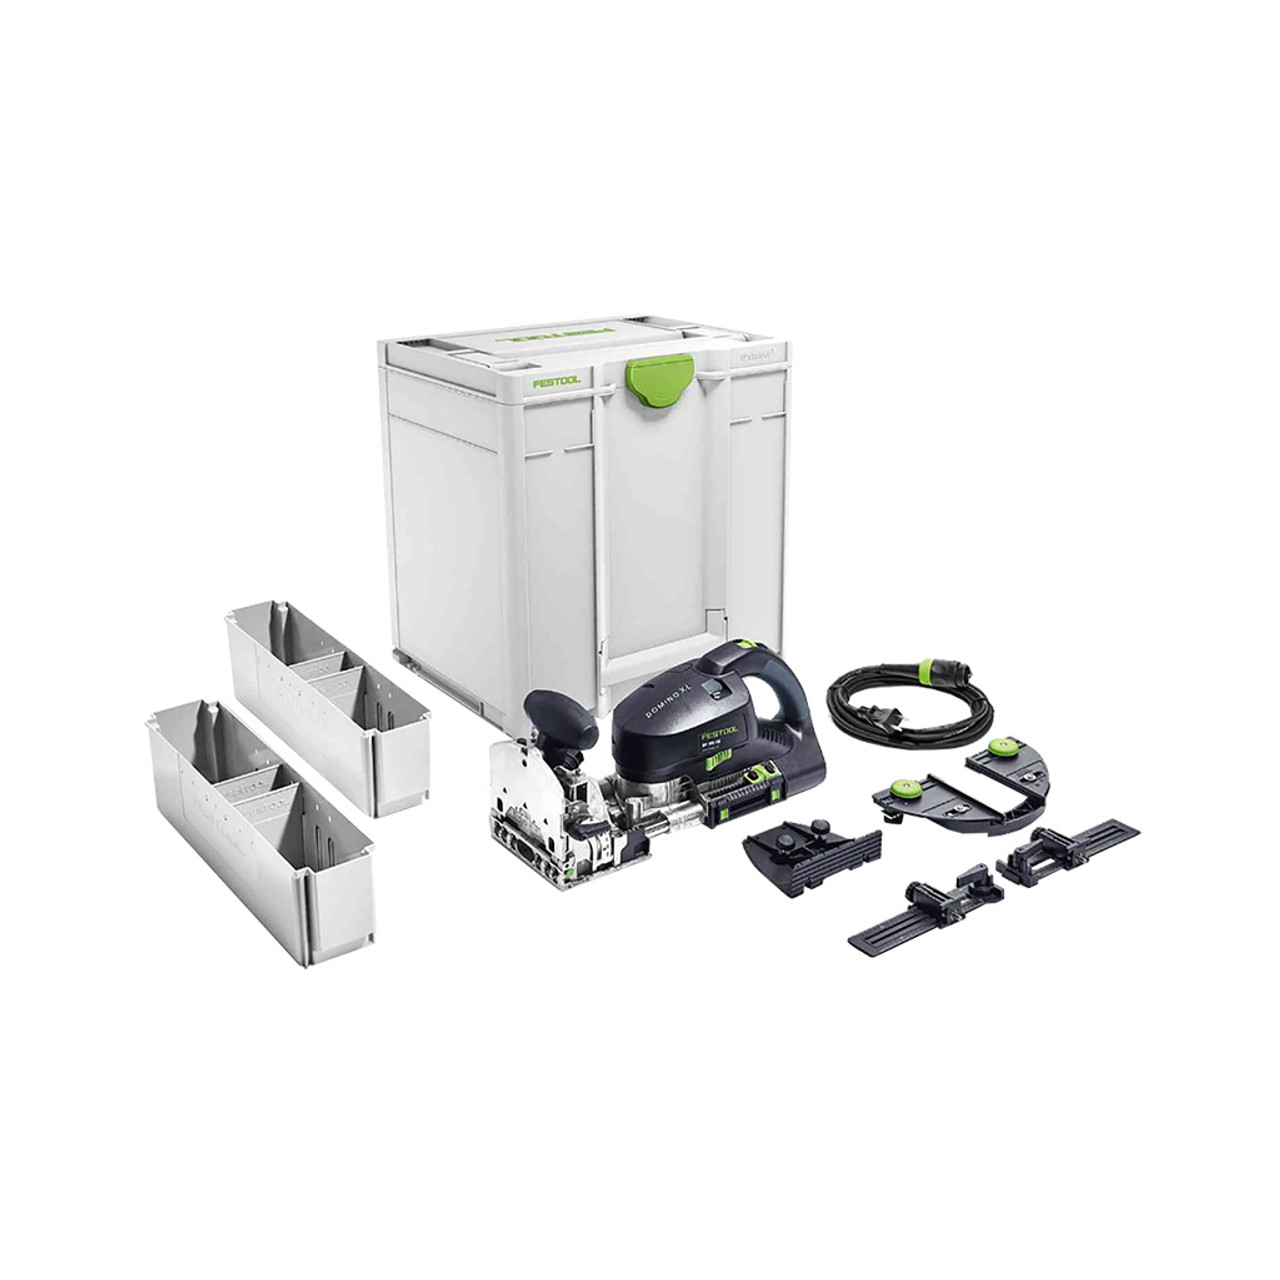 Festool DOMINO XL Joiner Midwest Technology